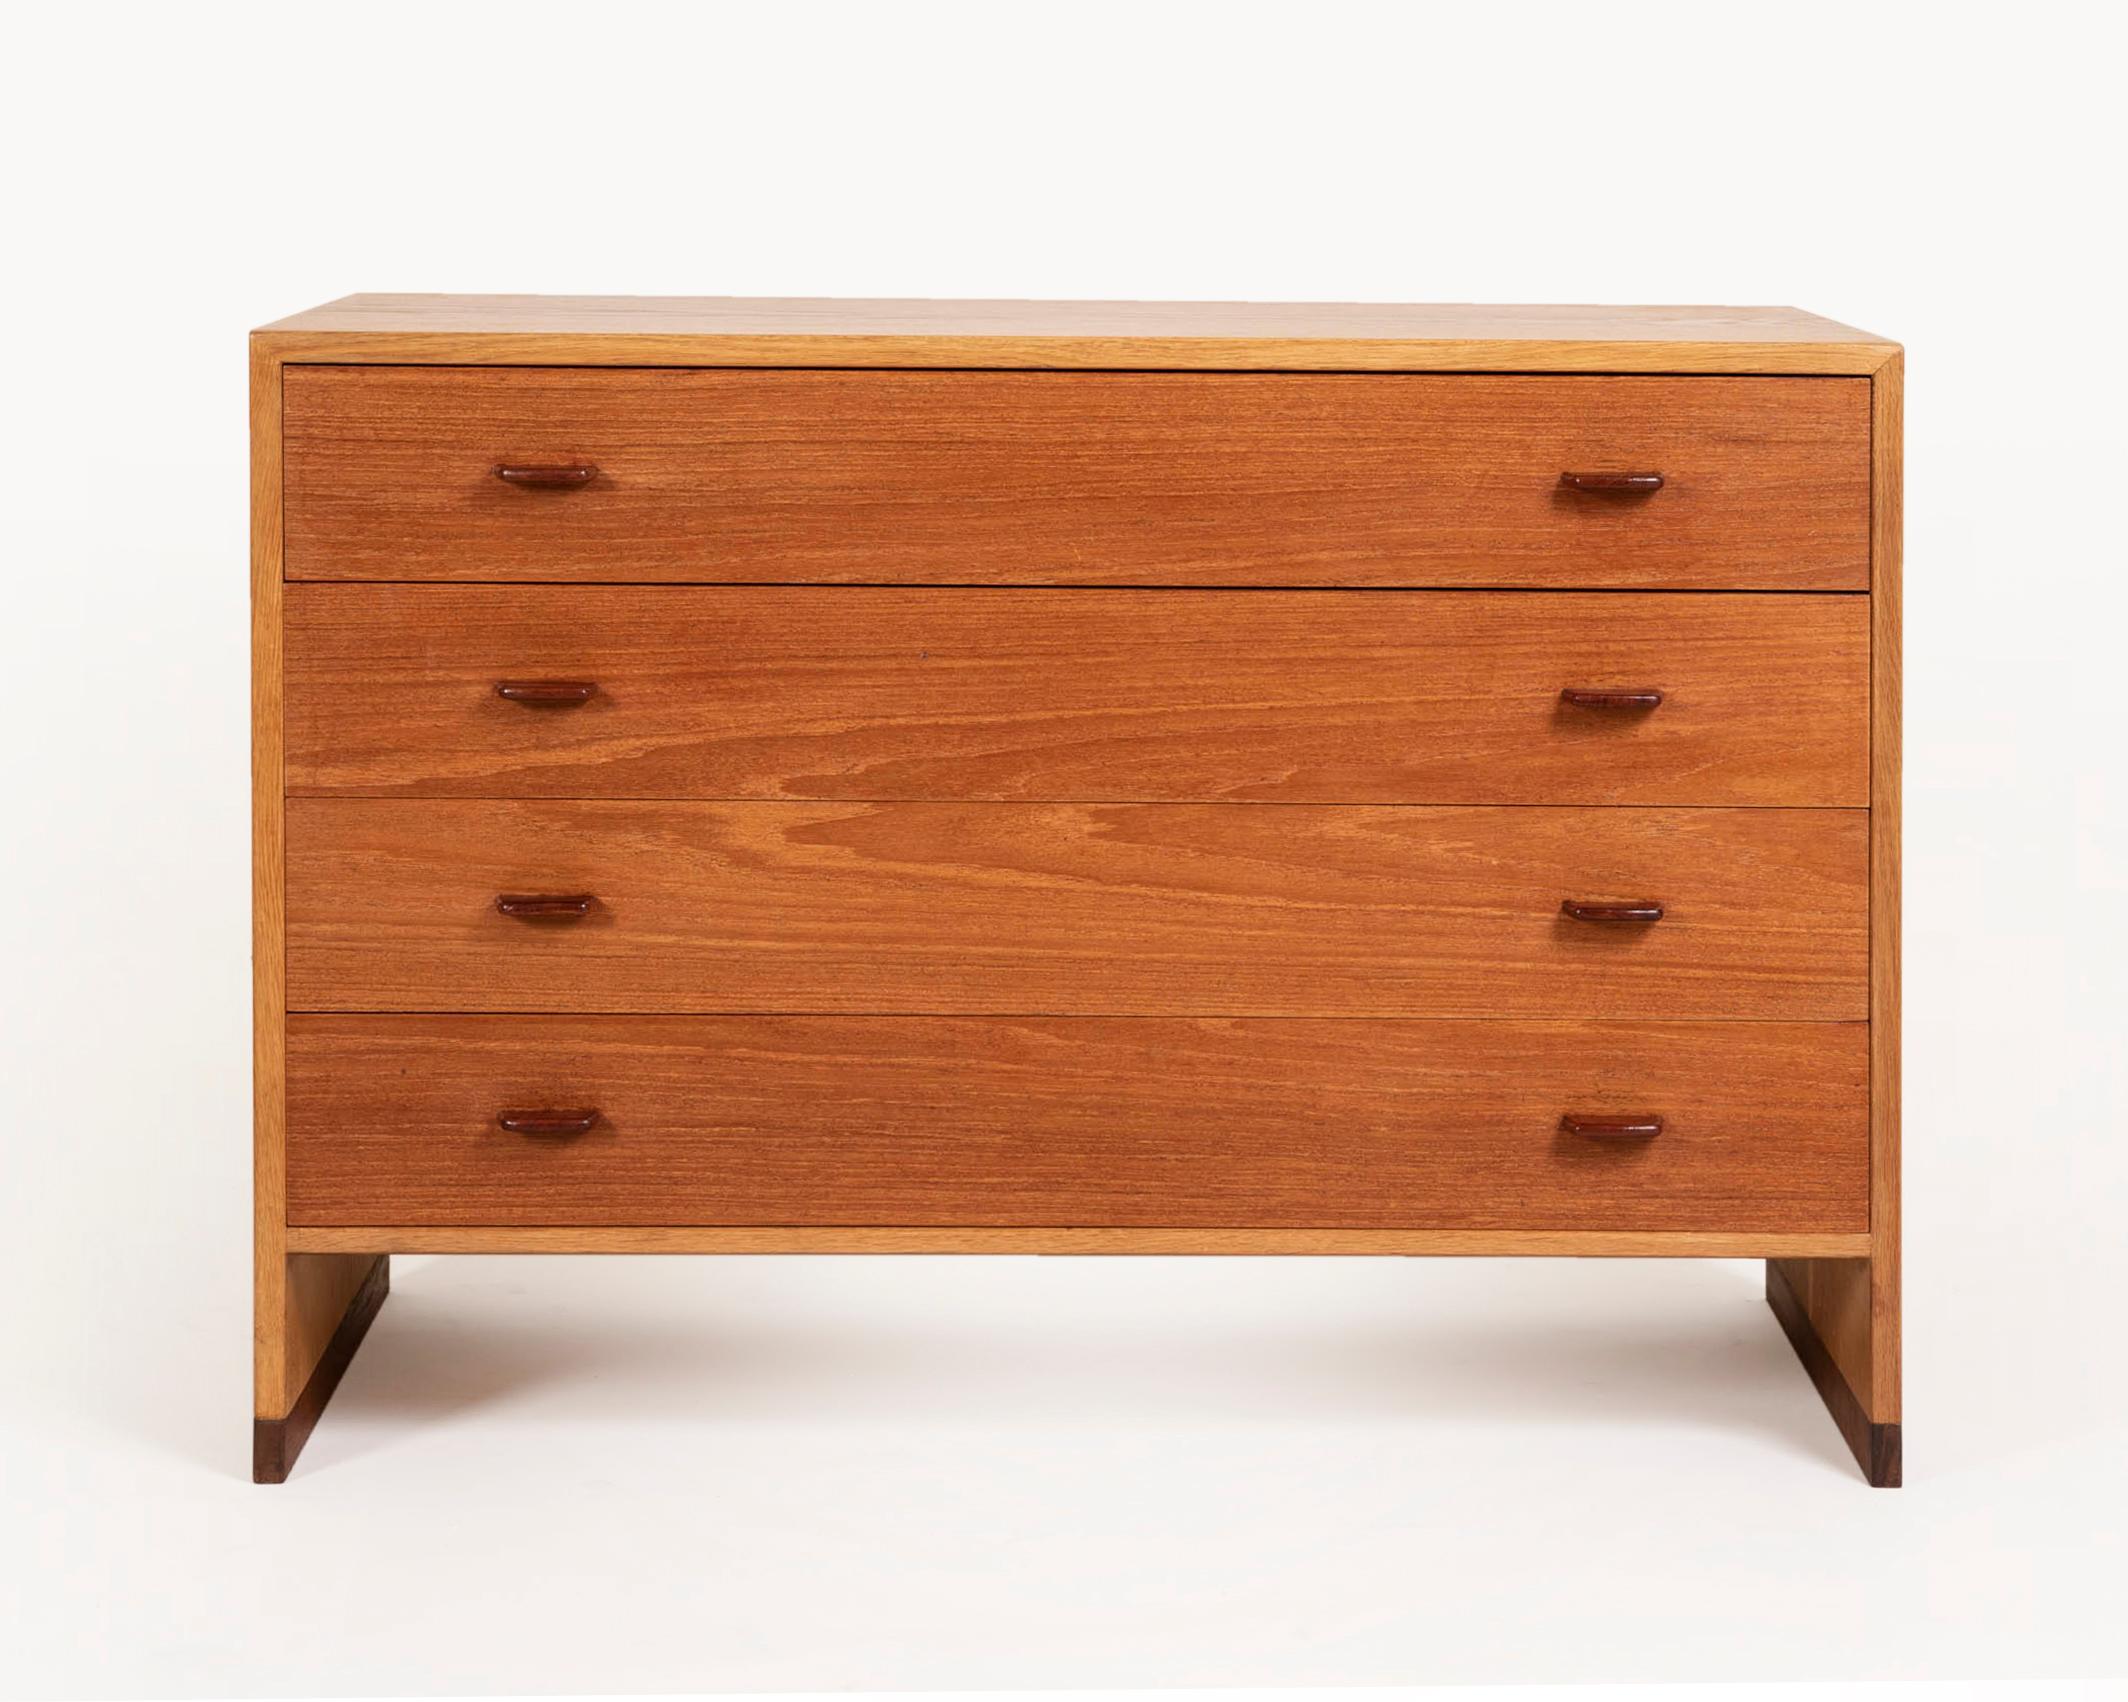 Vintage 4-drawer chest of drawers in light oak and teak with handles designed in the shape of drops.
This model RY17 dresser has 4 drawers and is equipped with the iconic handles designed by Hans Wegner, carved from solid oak.
The drawers are raised